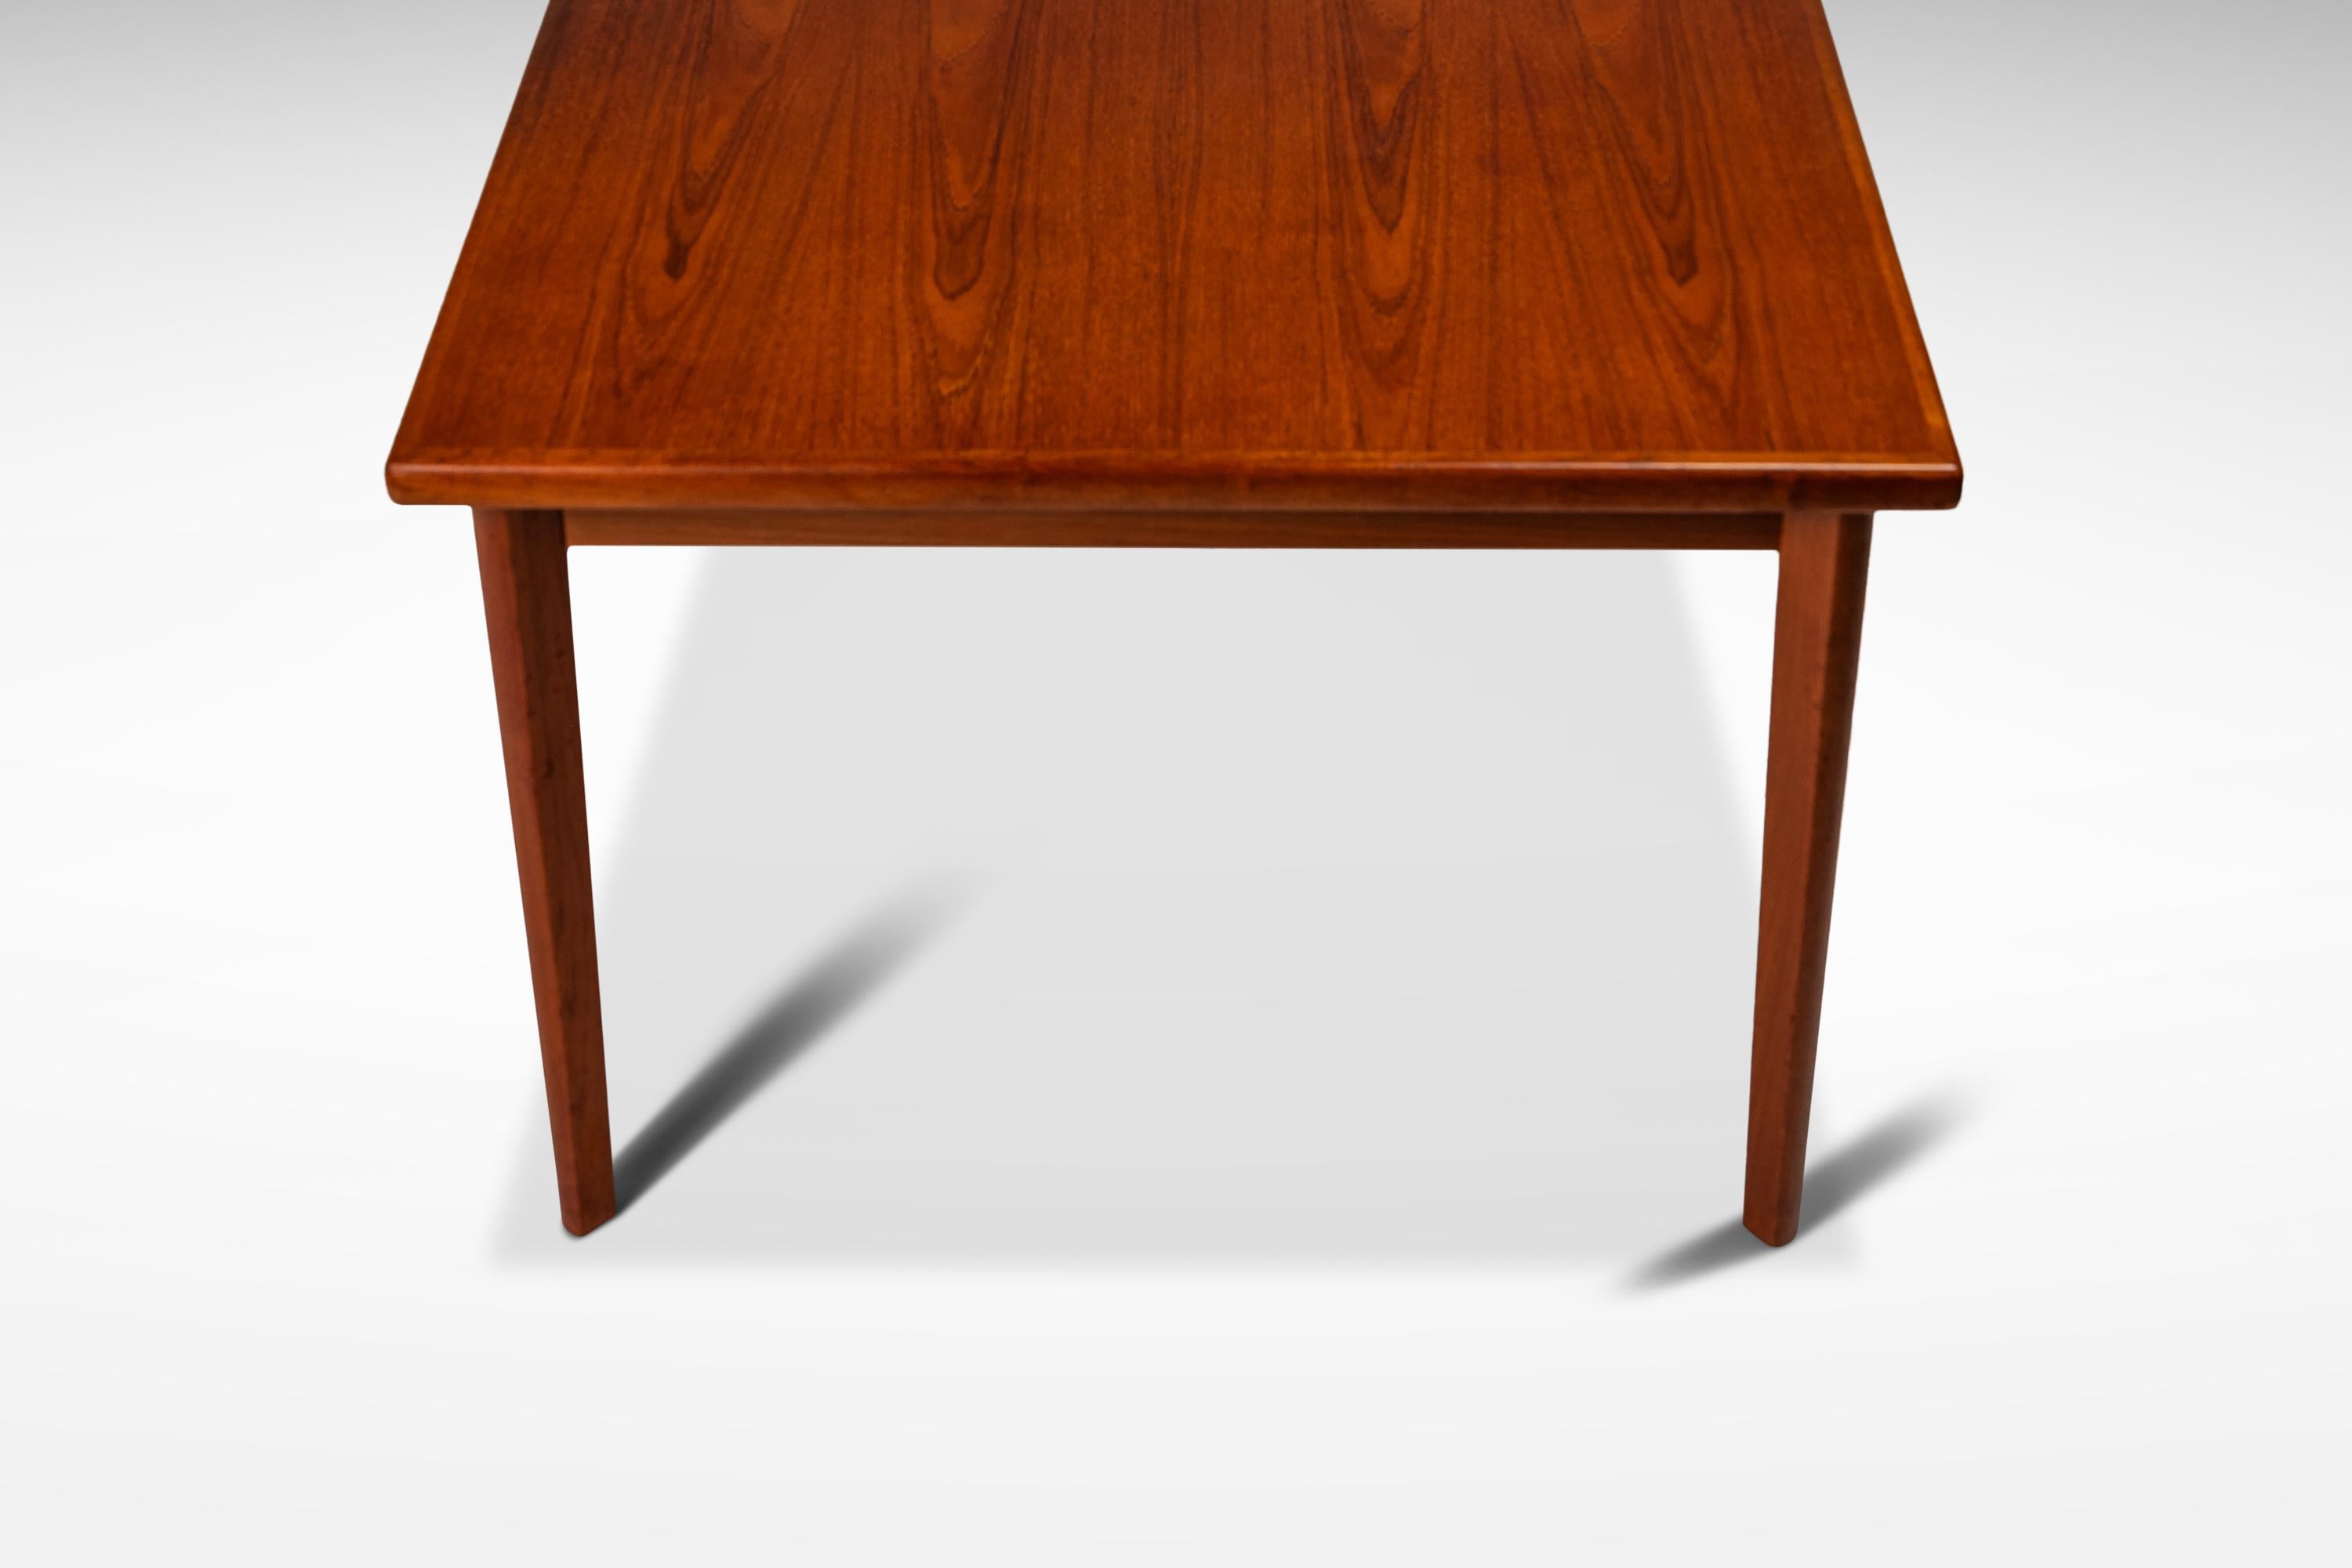 Teak Expansion Dining Table w/ Stow-in Leaves by BRDR Furbo, Denmark, c. 1960s In Good Condition For Sale In Deland, FL